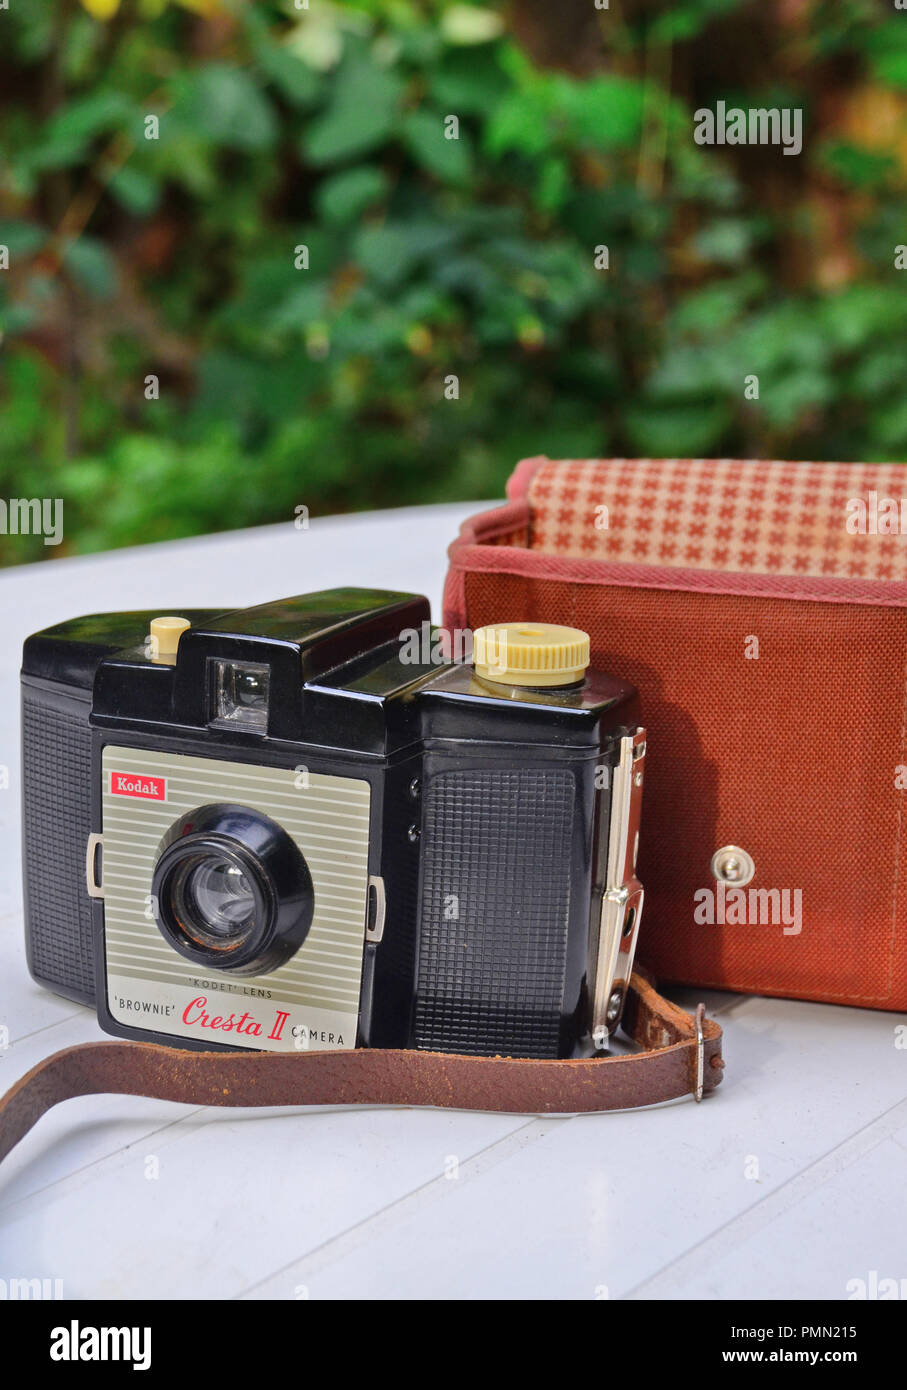 The vintage  Brownie Cresta II camera with its shoulder bag / case. Stock Photo